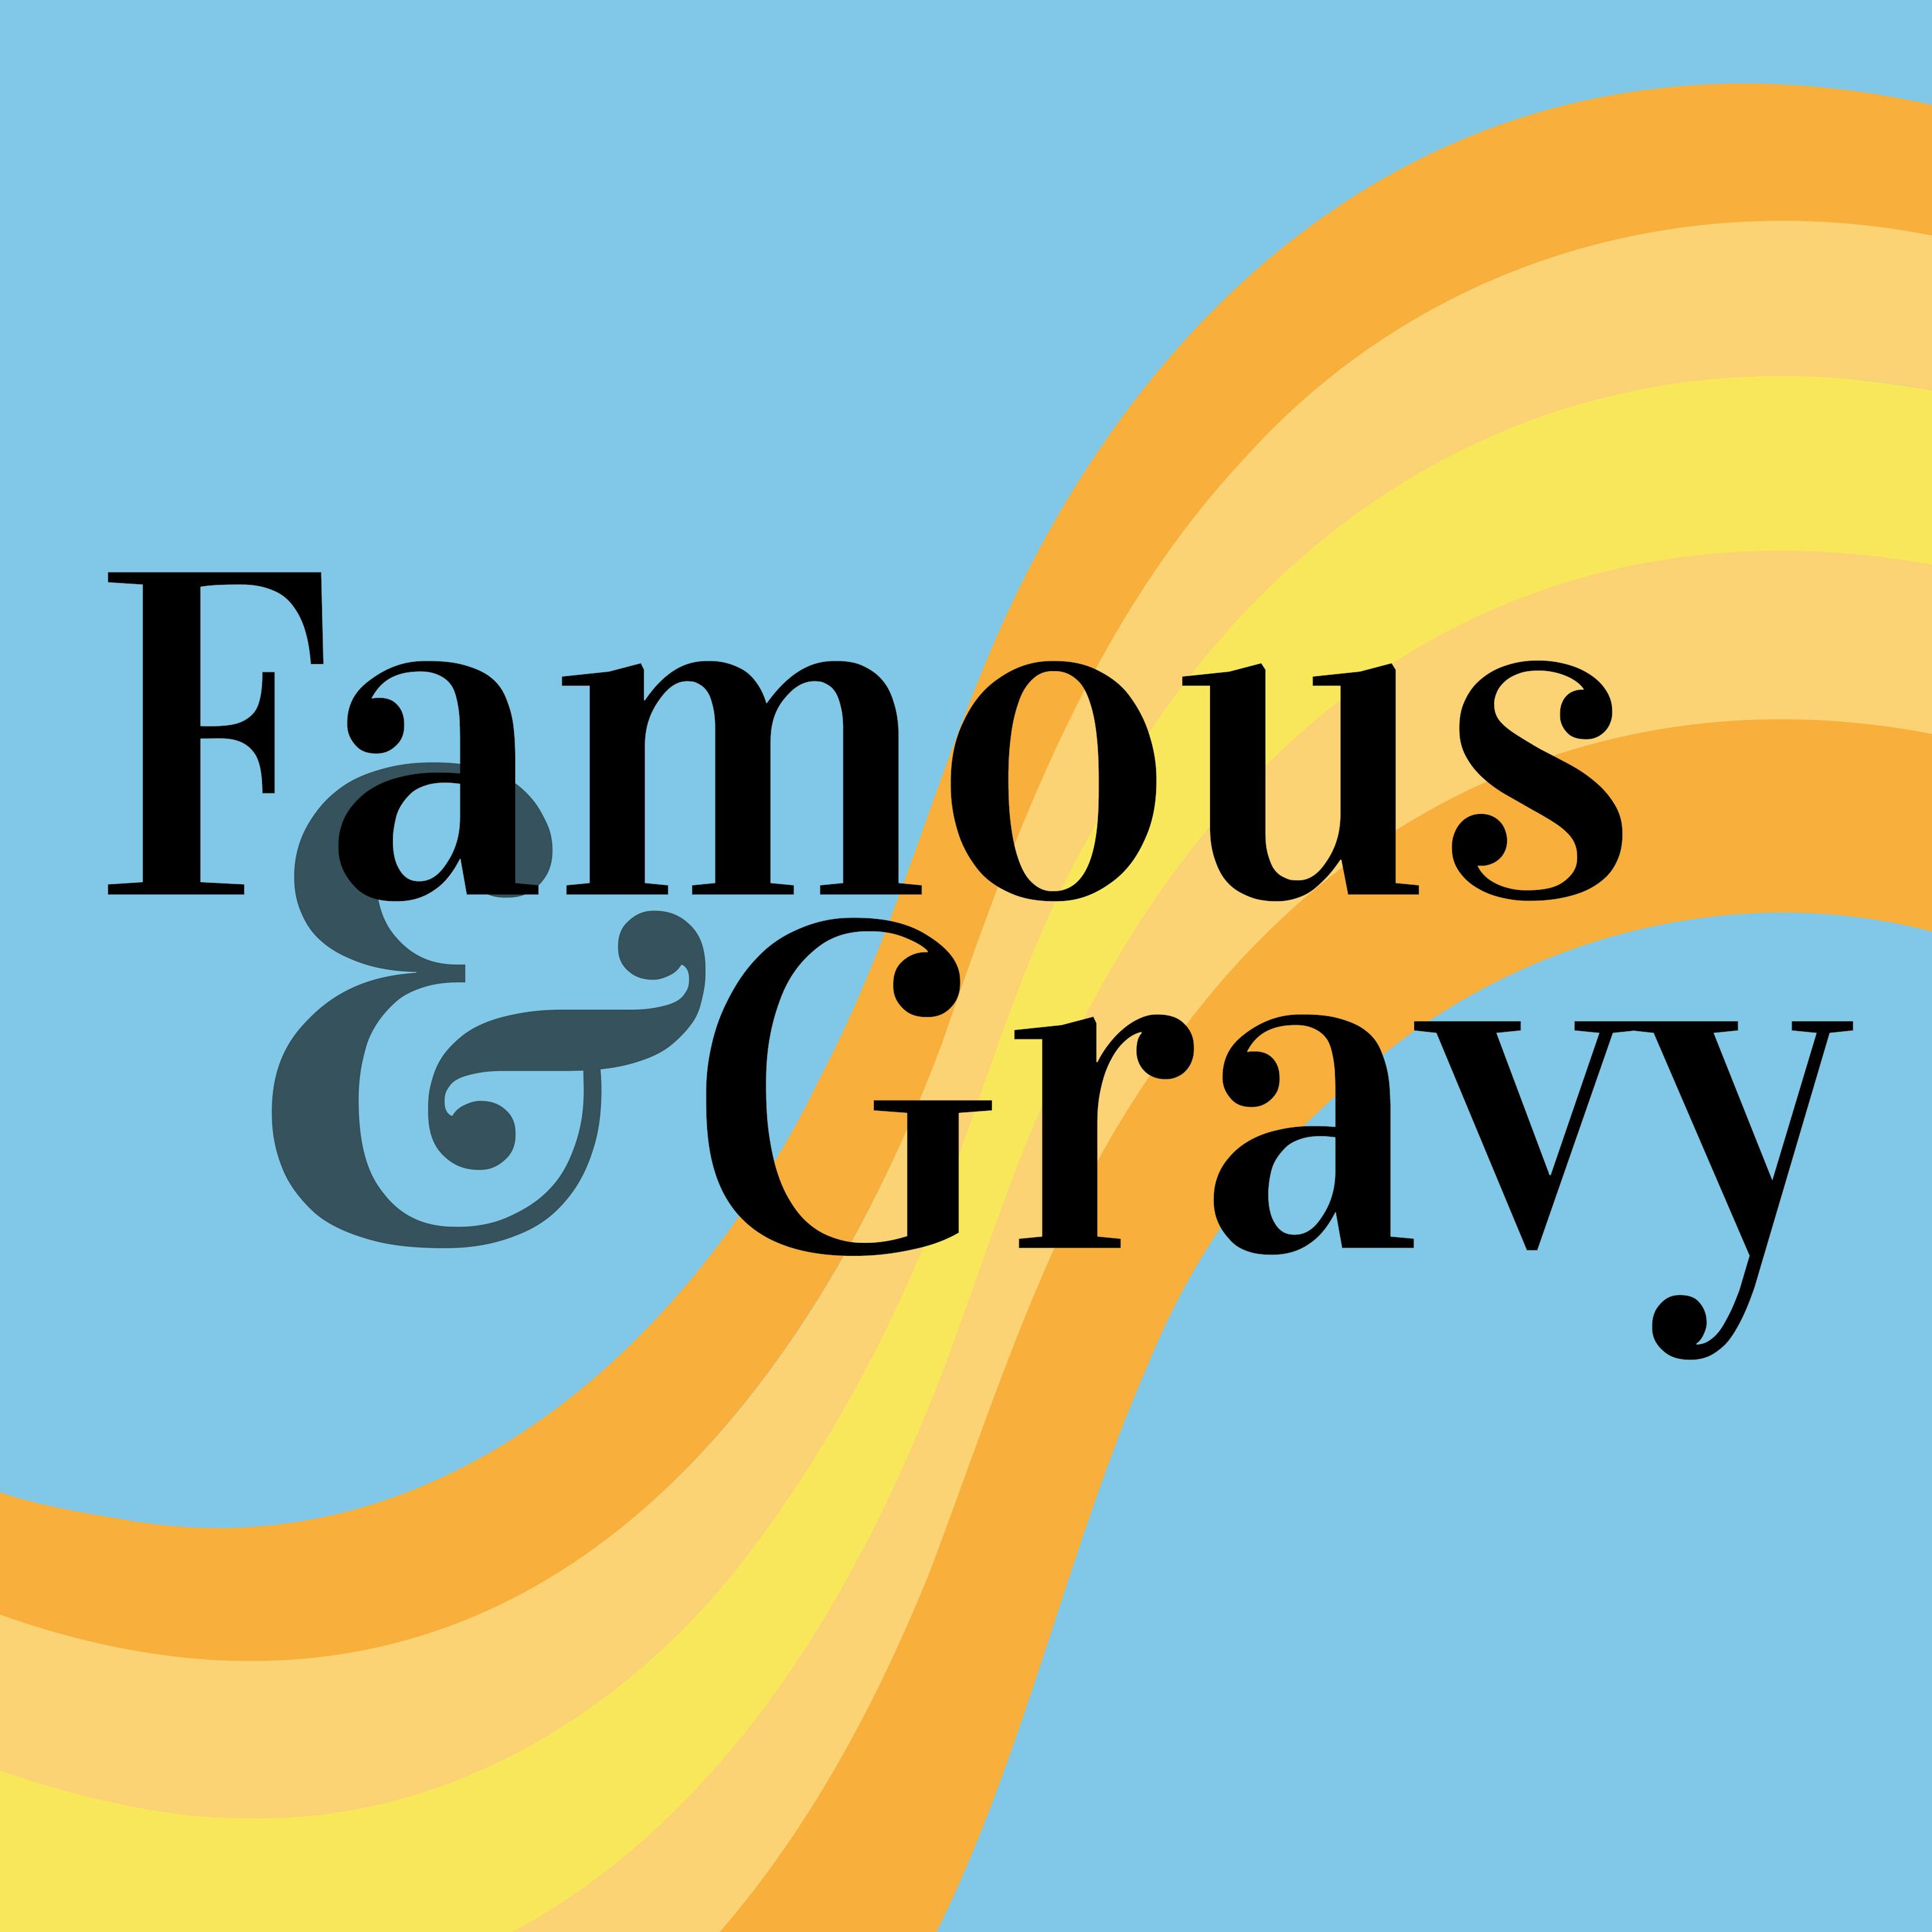 Famous and Gravy